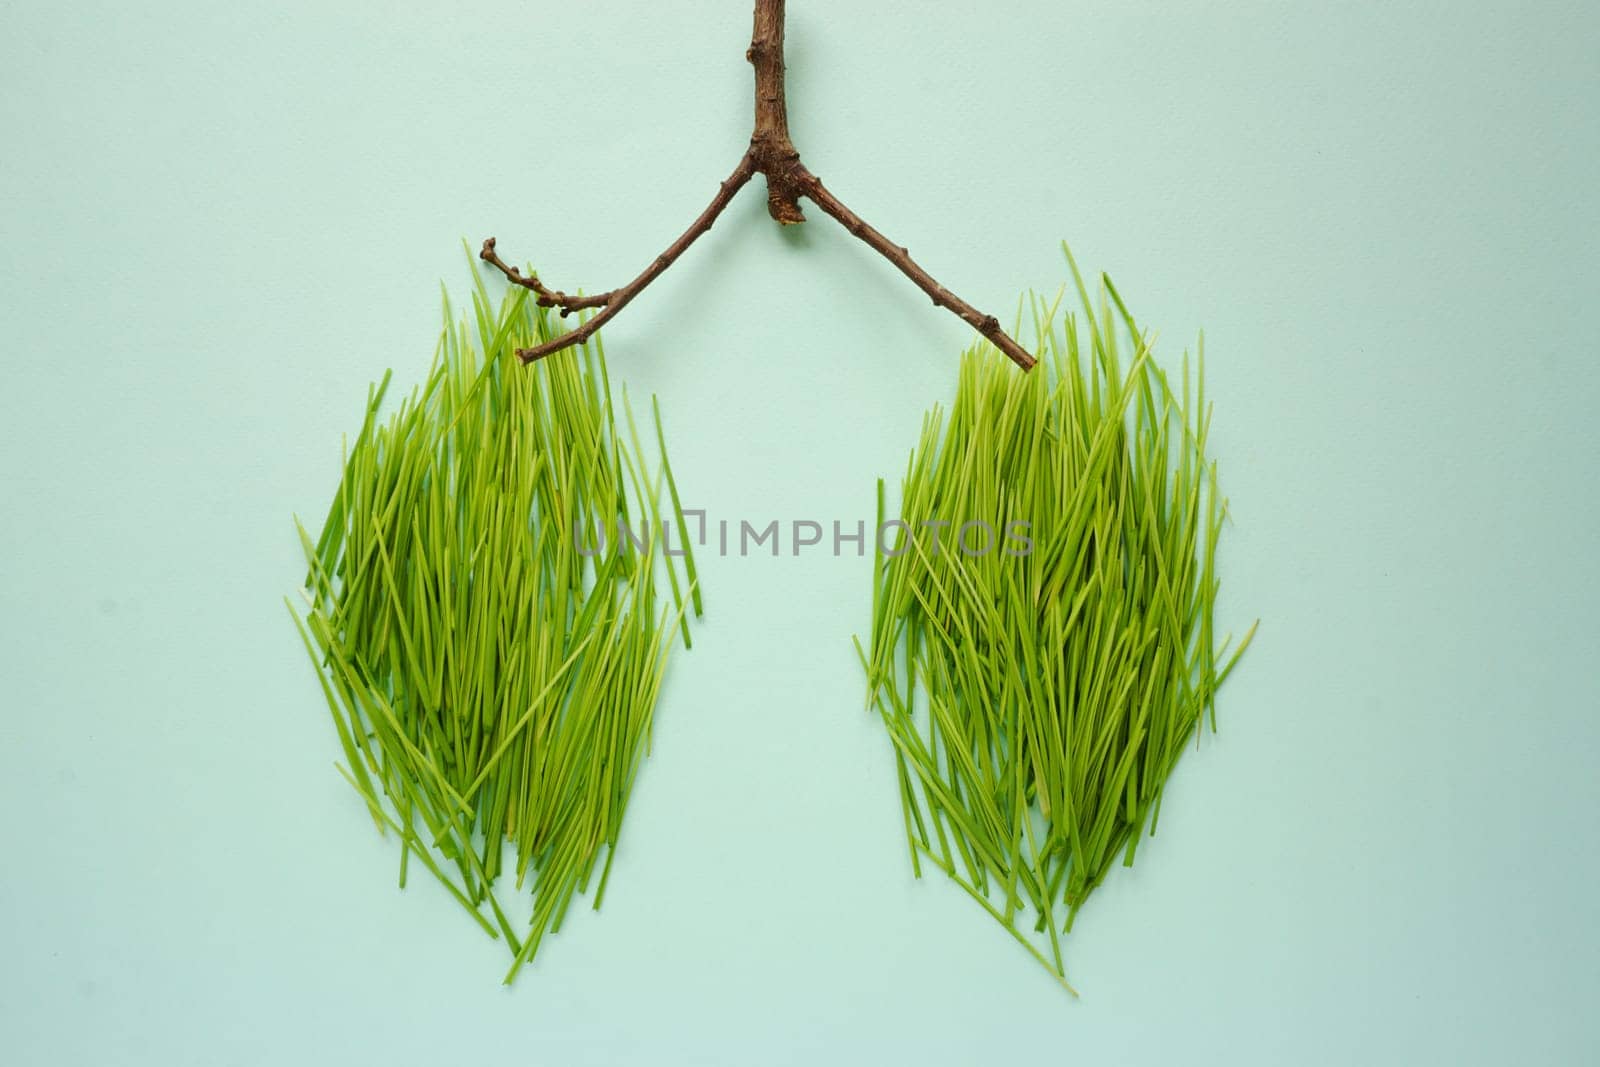 The green grass is laid out in the form of human lungs by Spirina